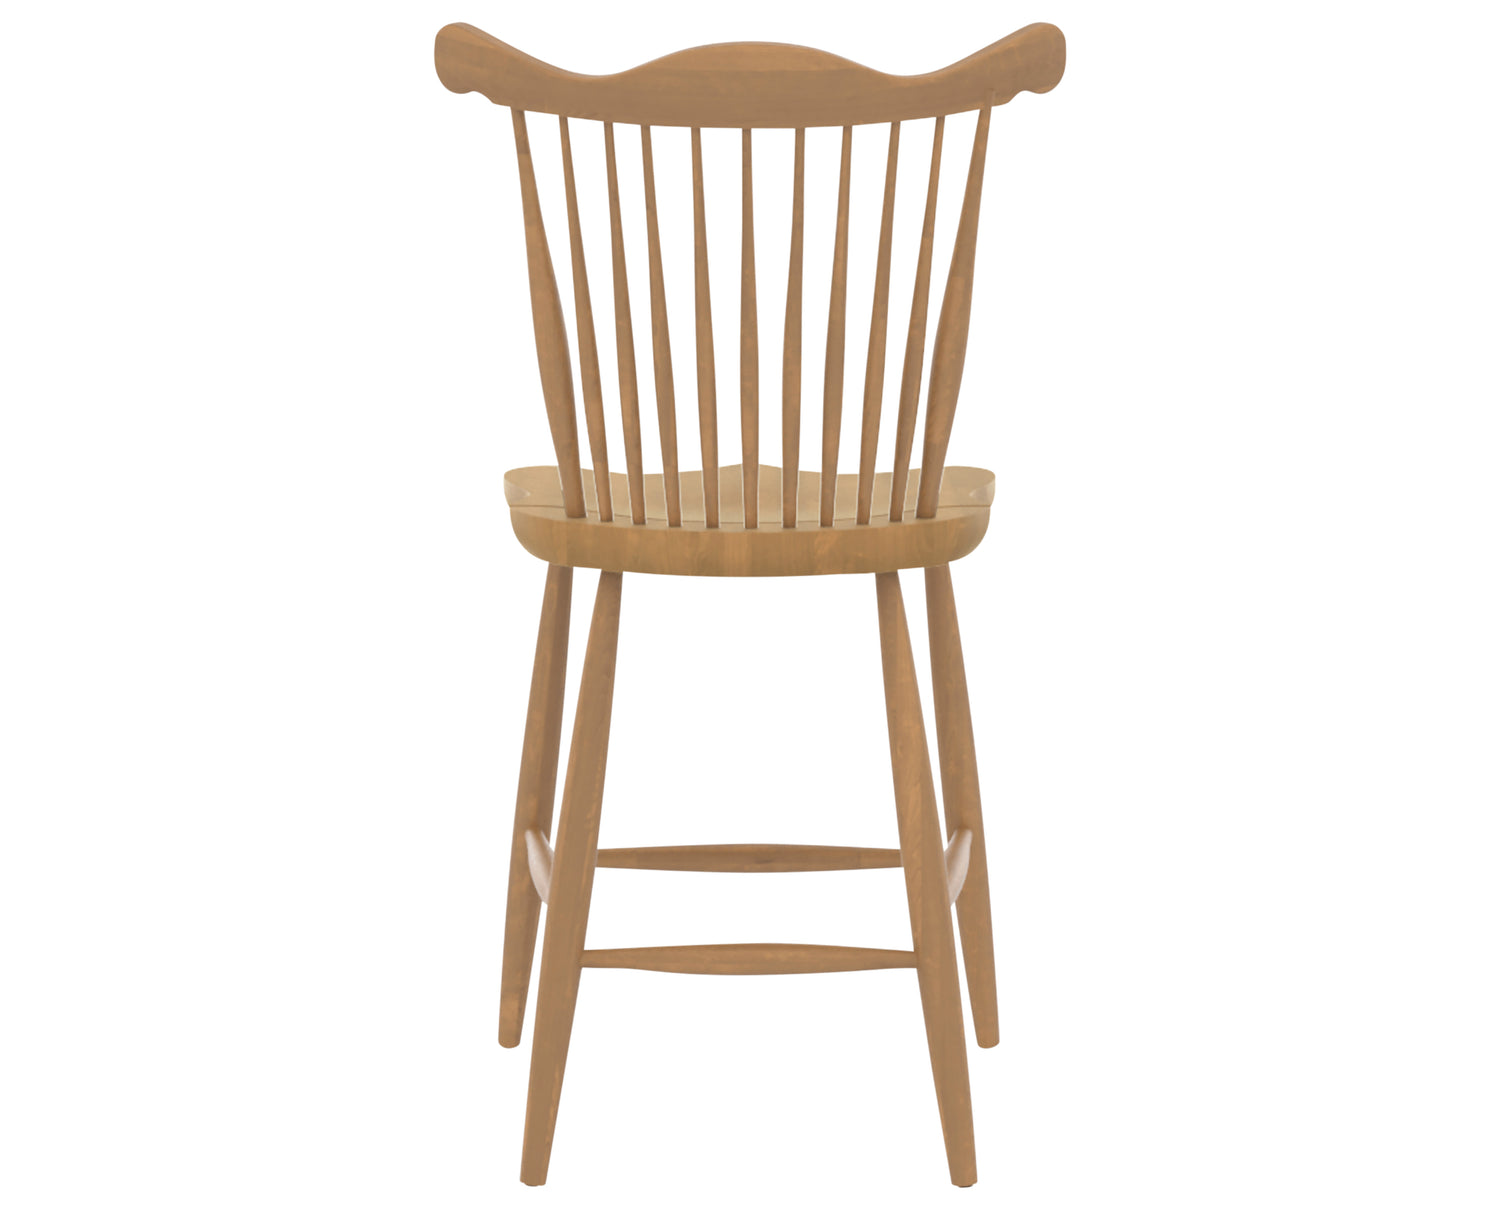 Honey Washed | Canadel Farmhouse Counter Stool 8162 | Valley Ridge Furniture